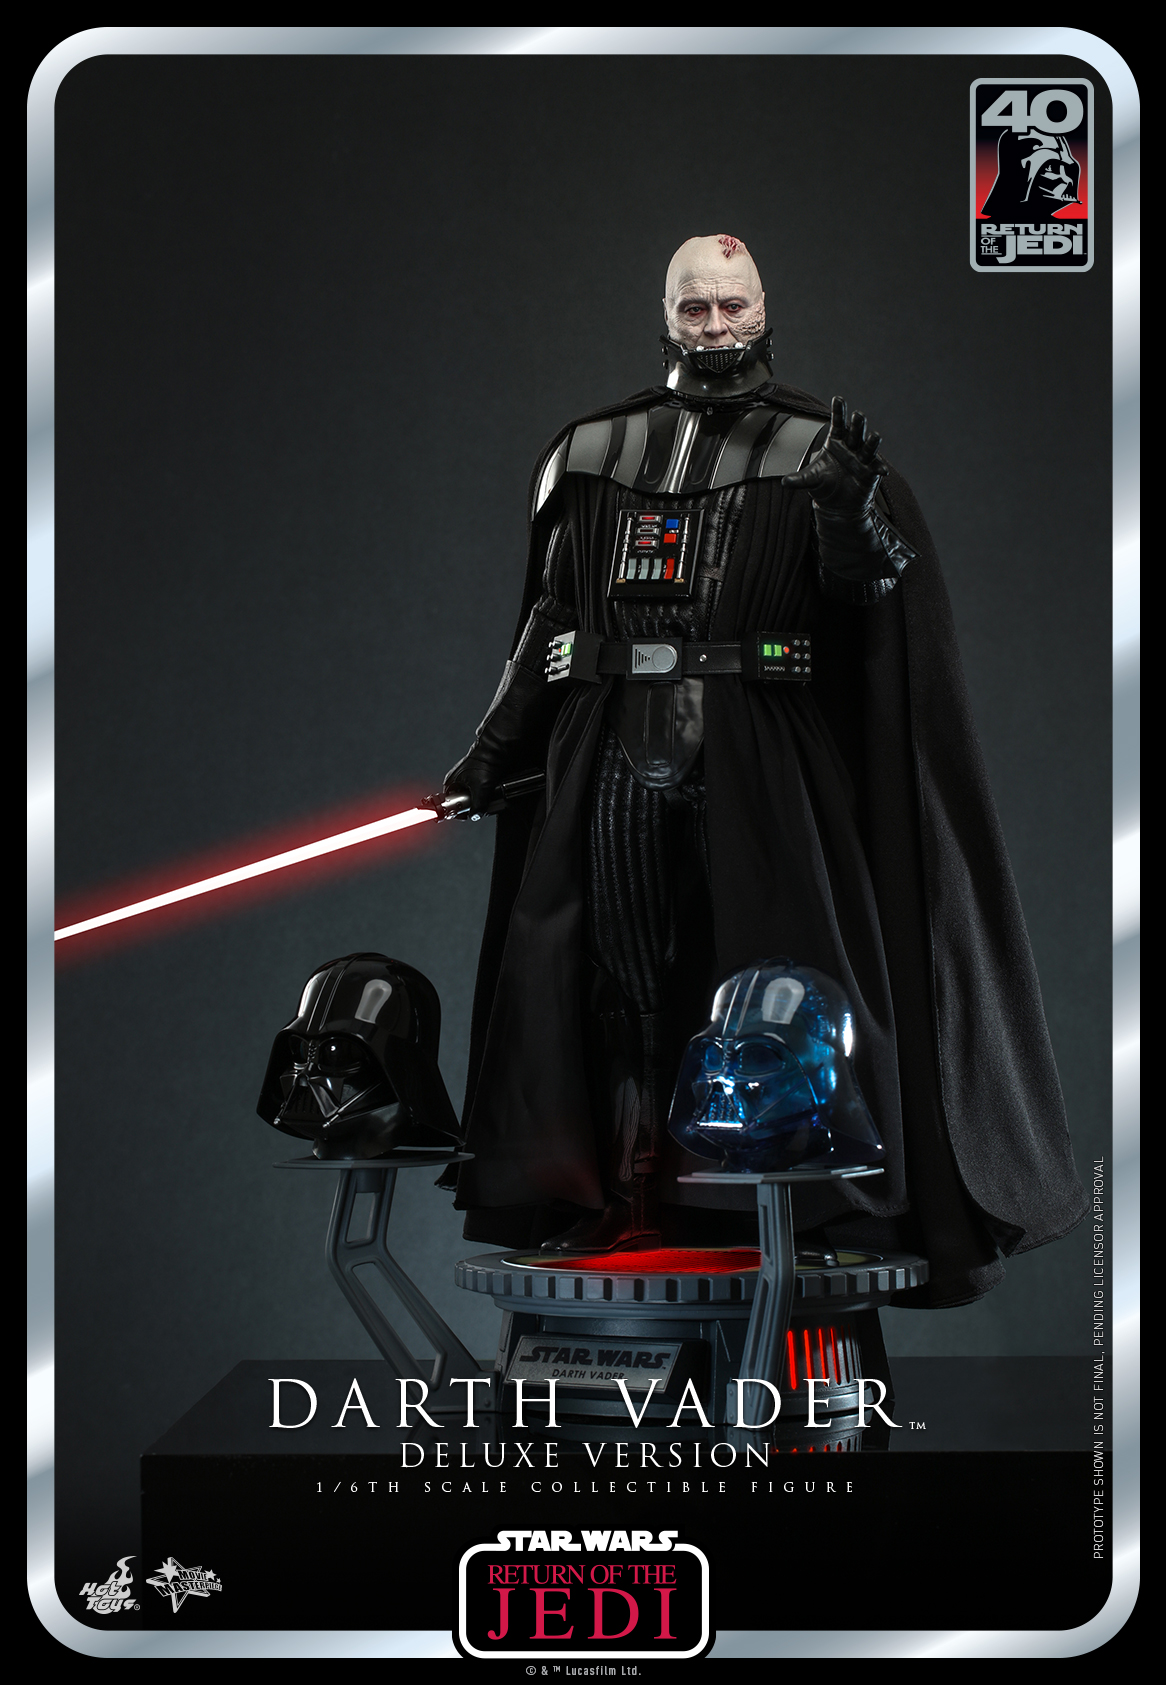 Darth Vader (Deluxe) - Hot Toys 1/6th Scale Collectibles, 40 Years ROTJ, Movie Masterpiece Series - Star Wars Collector's Guide